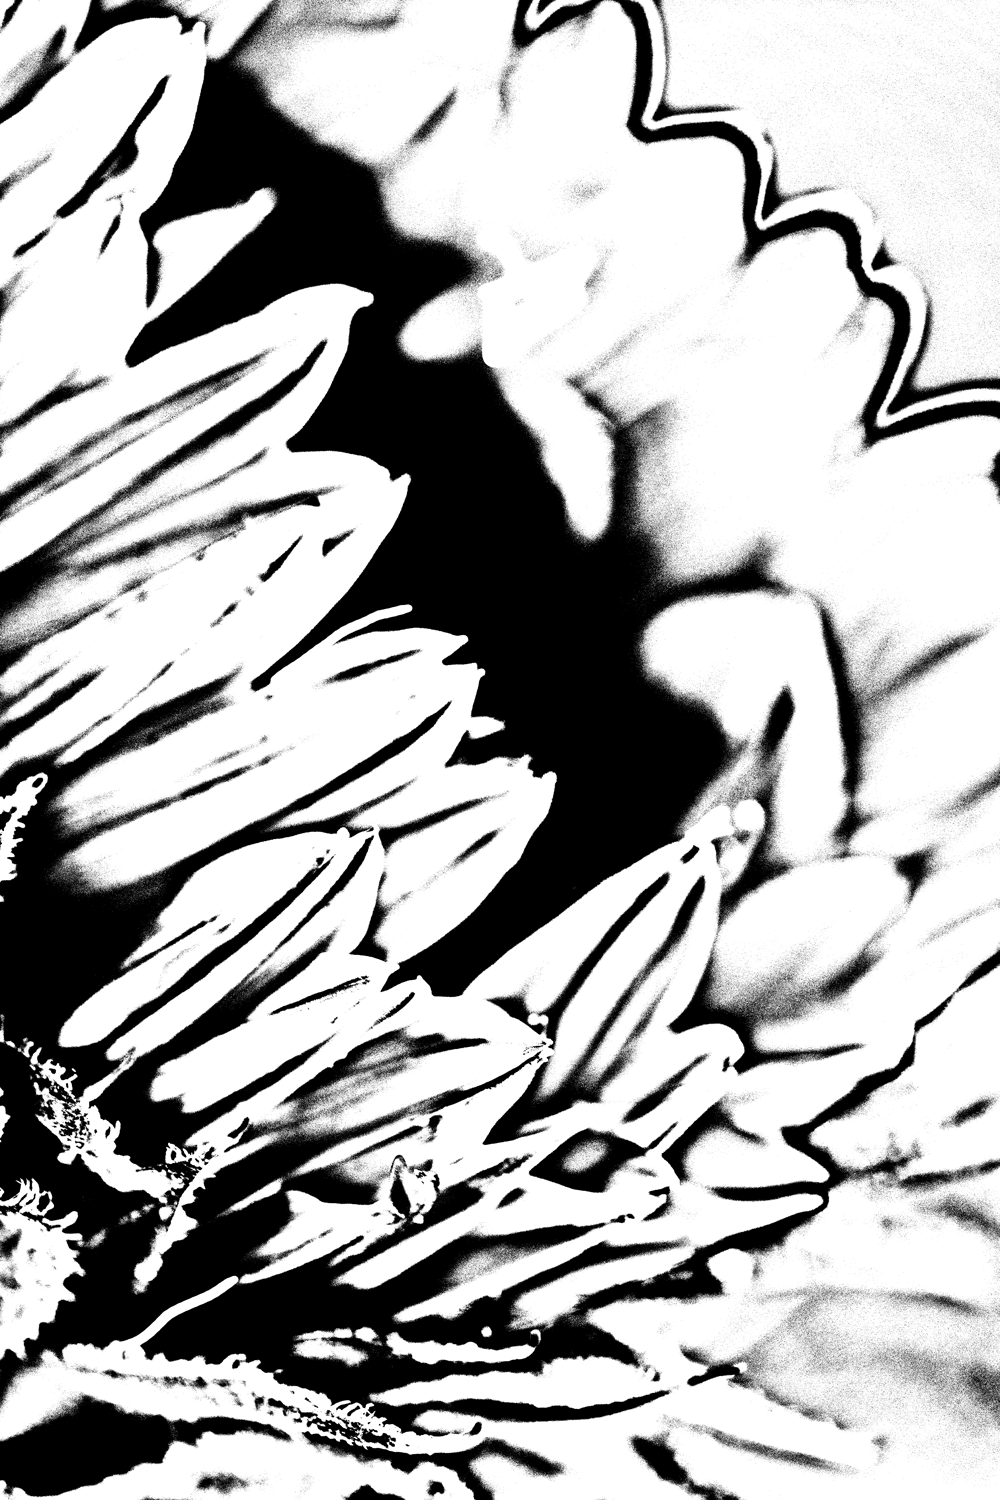 Inverted black and white photograph depicting a close up of a sunflower.